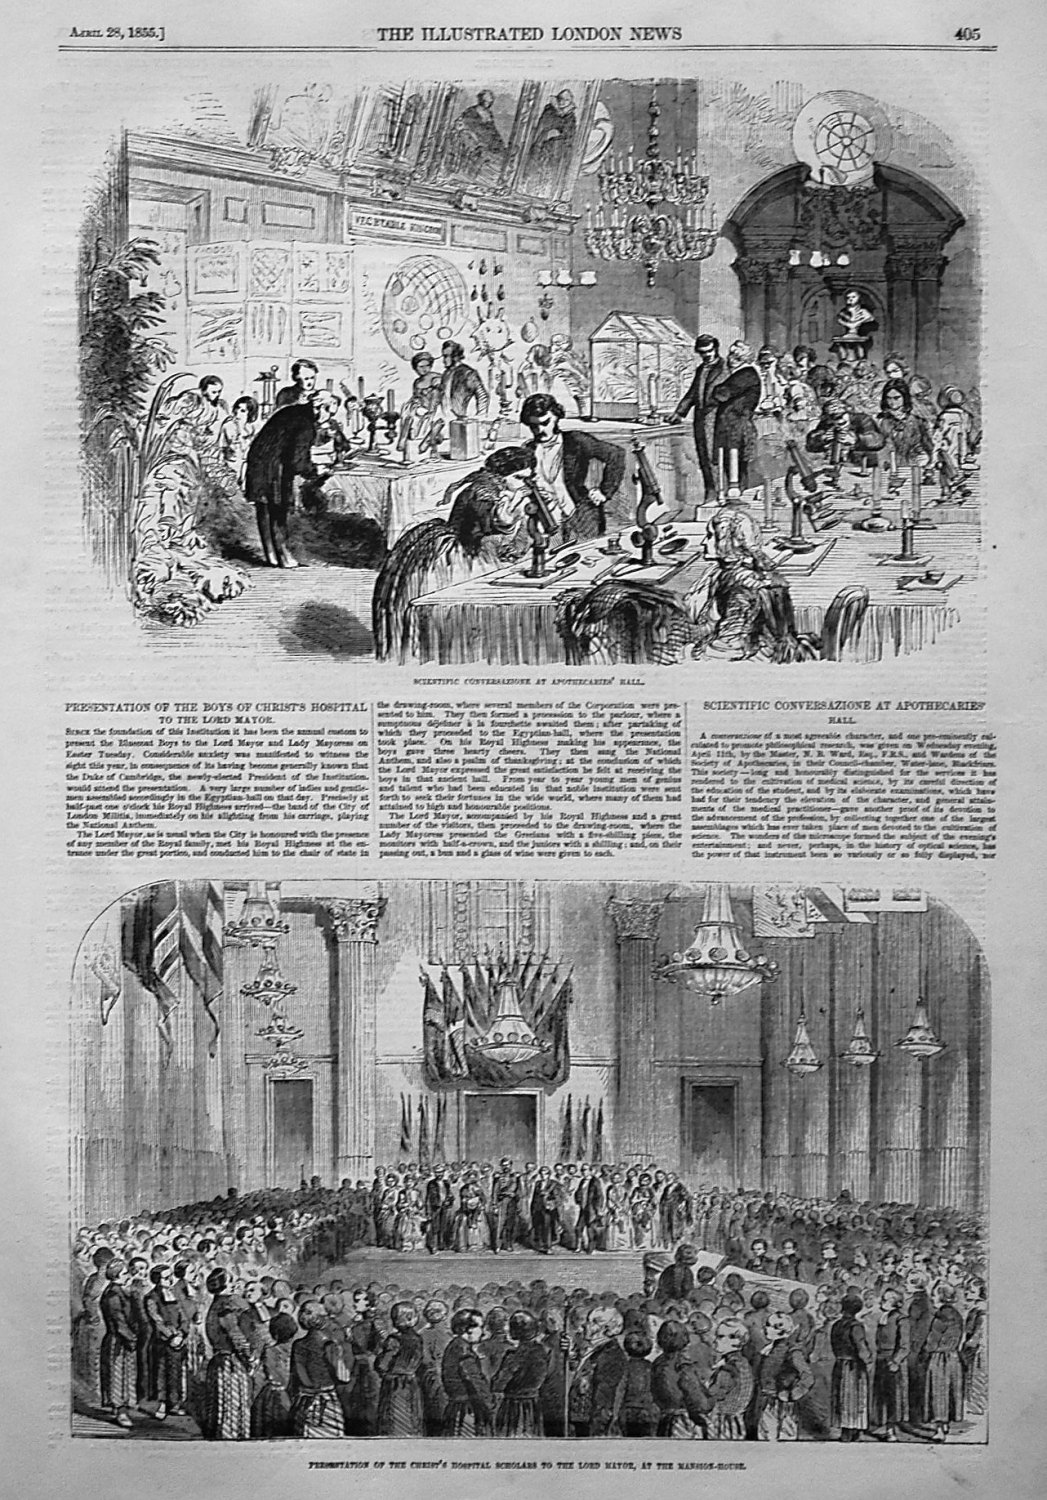 Presentation of the Boys of Christ's Hospital to the Lord Mayor. 1855